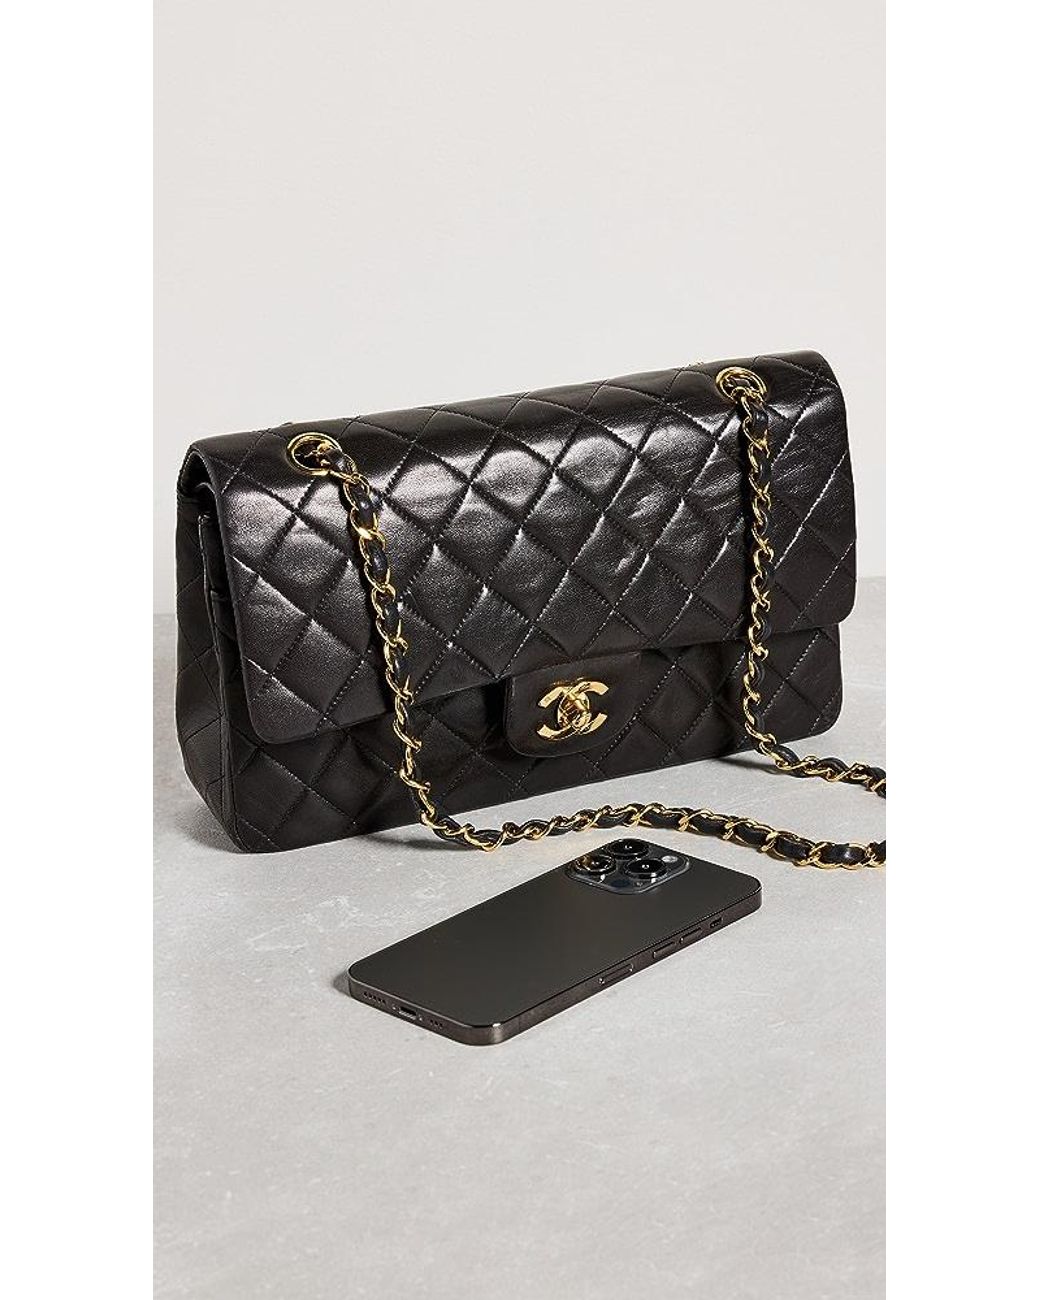 What Goes Around Comes Around Chanel Black Lambskin Flap Bag